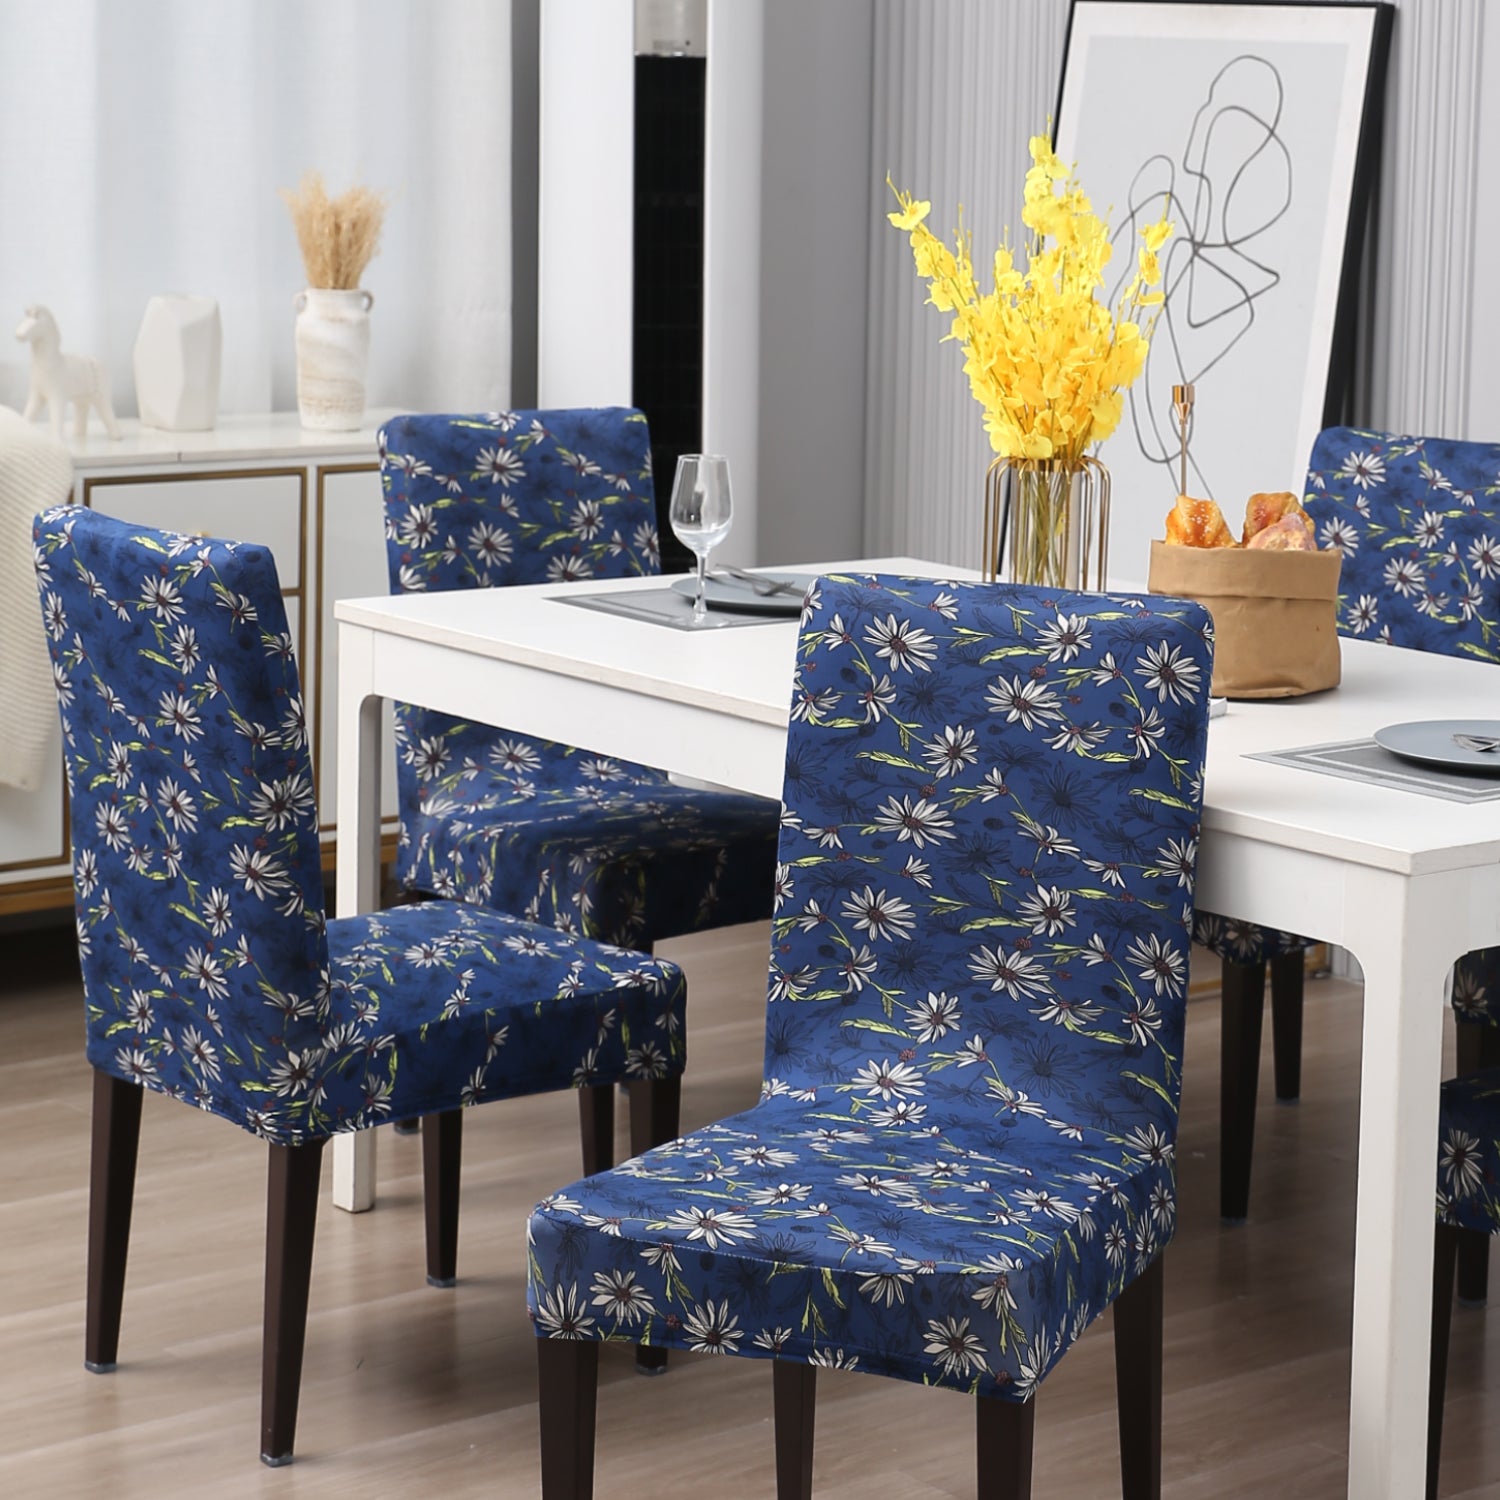 Elastic Stretchable Dining Chair Cover, Royal Blue White Flowers